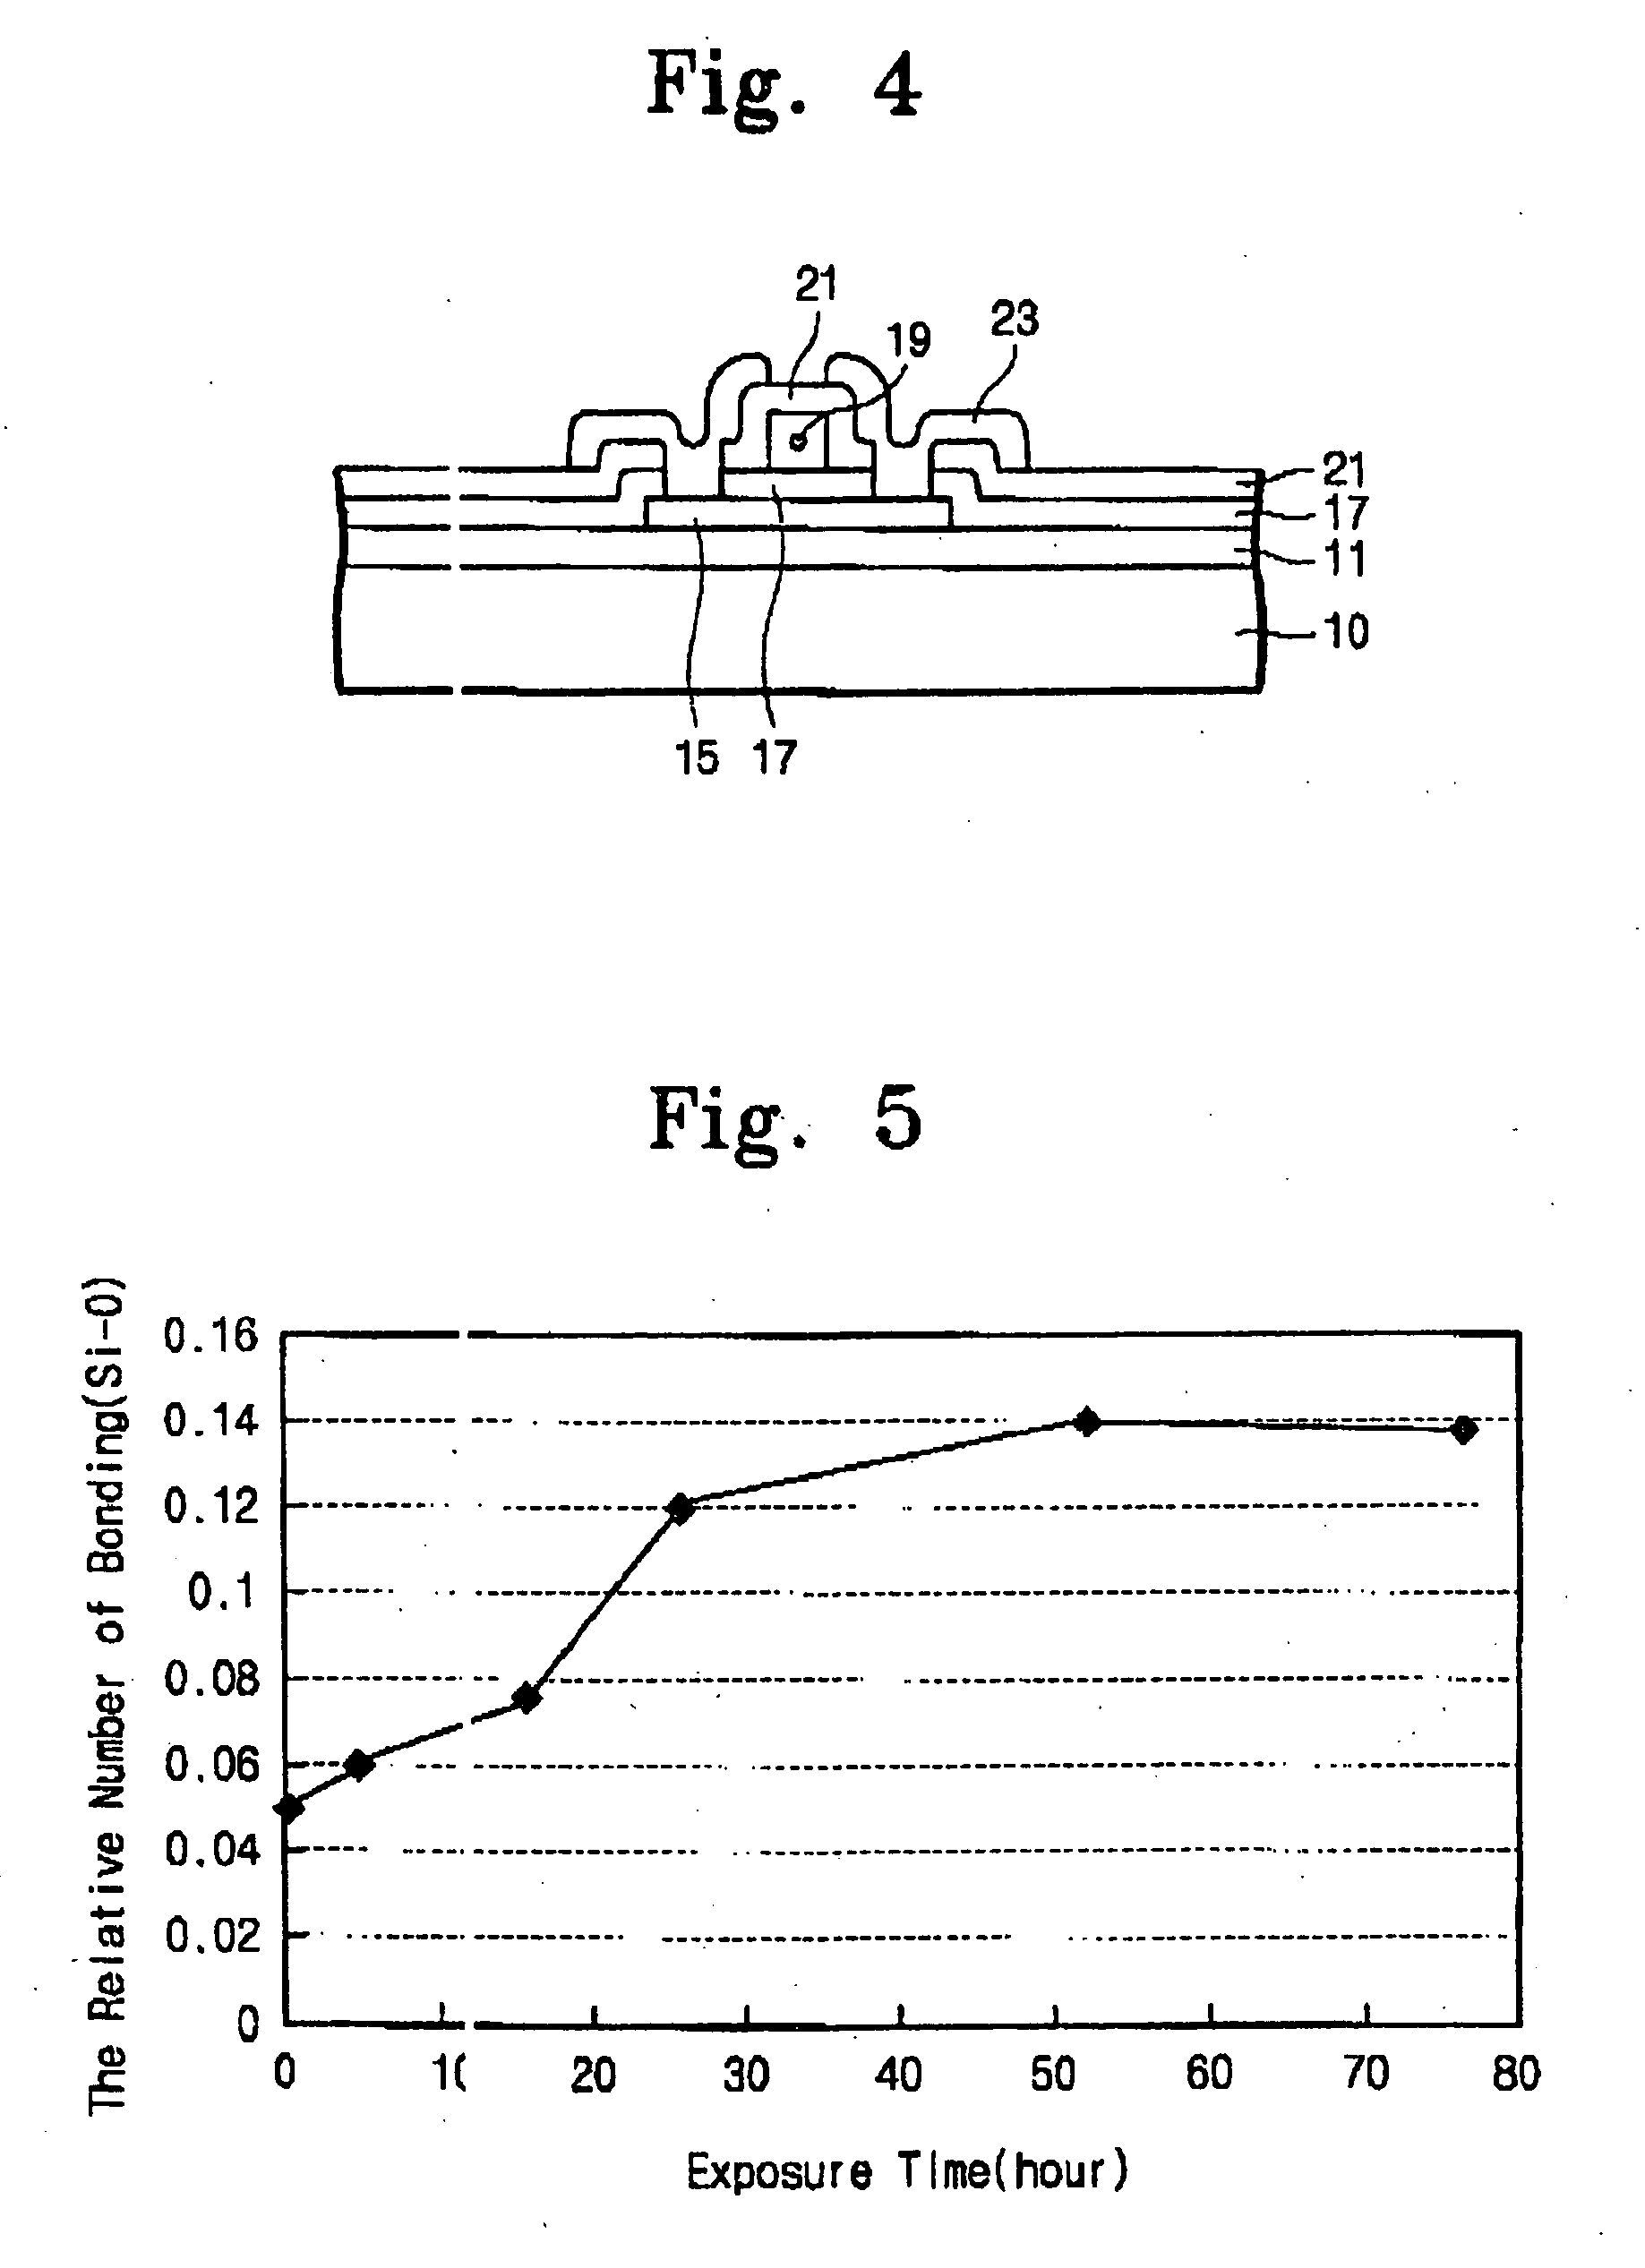 Low temperature polycrystalline silicon type thin film transistor and a method of the thin film transistor fabrication